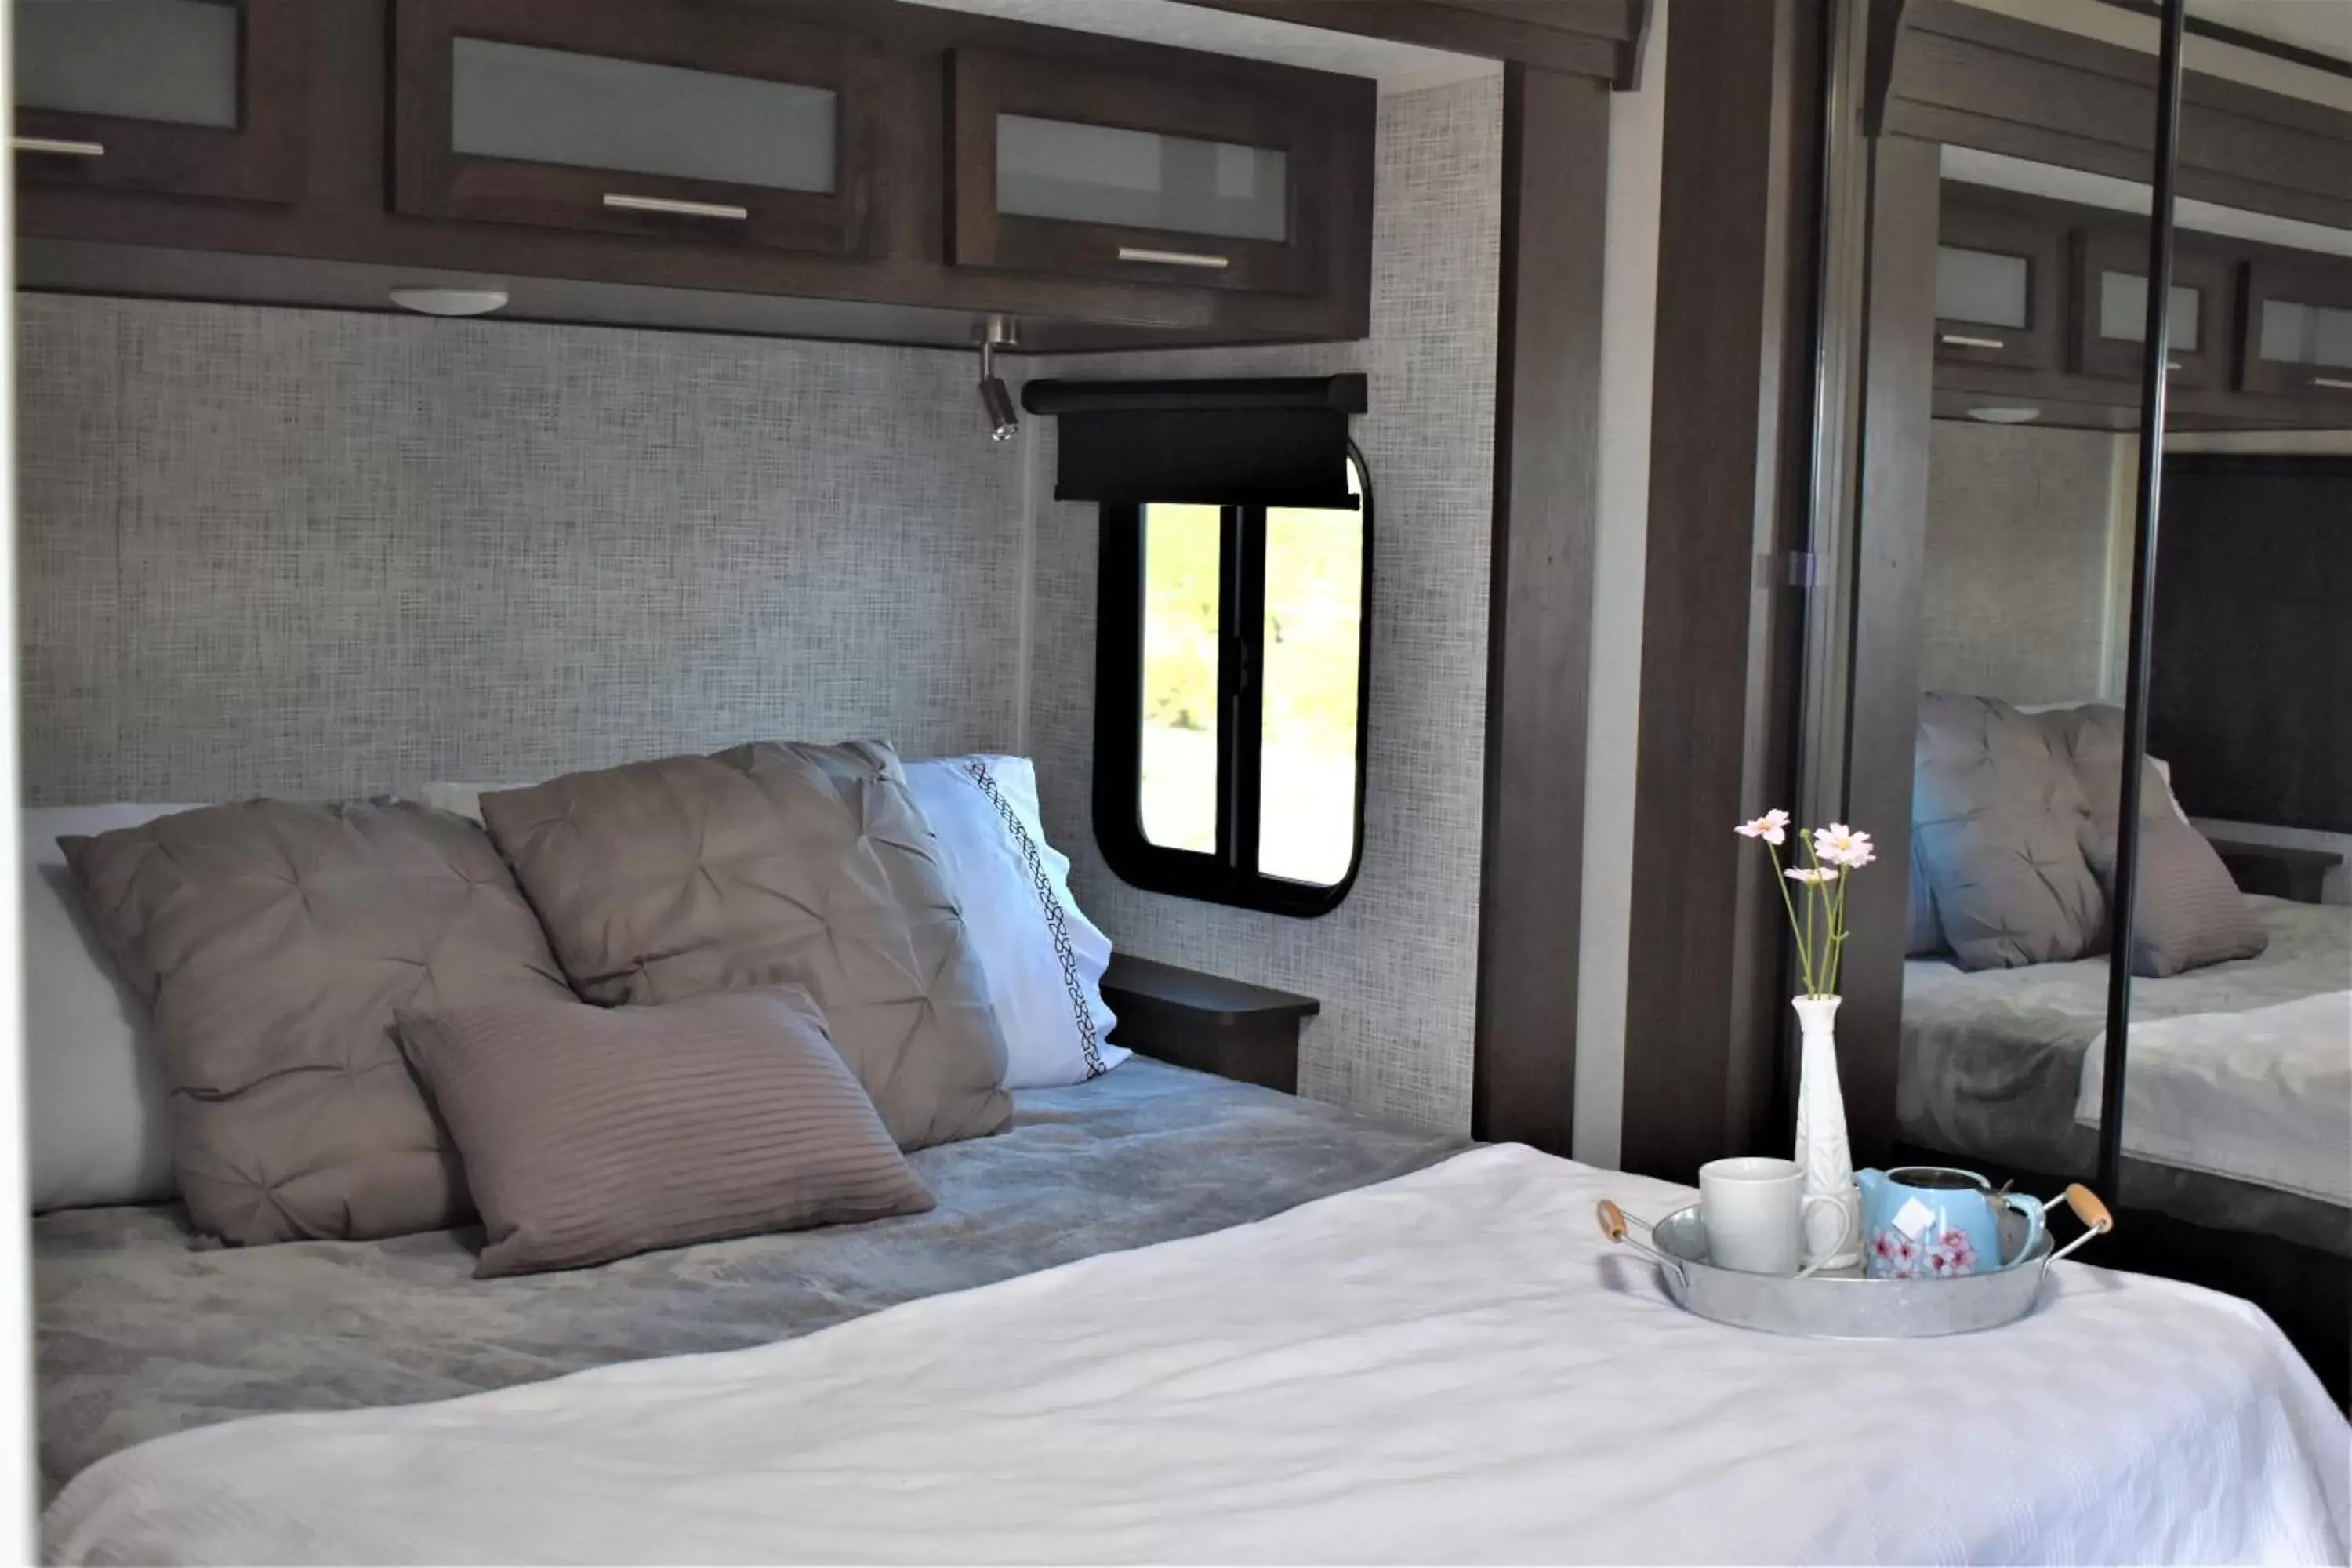 Bed in Grand Canyon RV Glamping